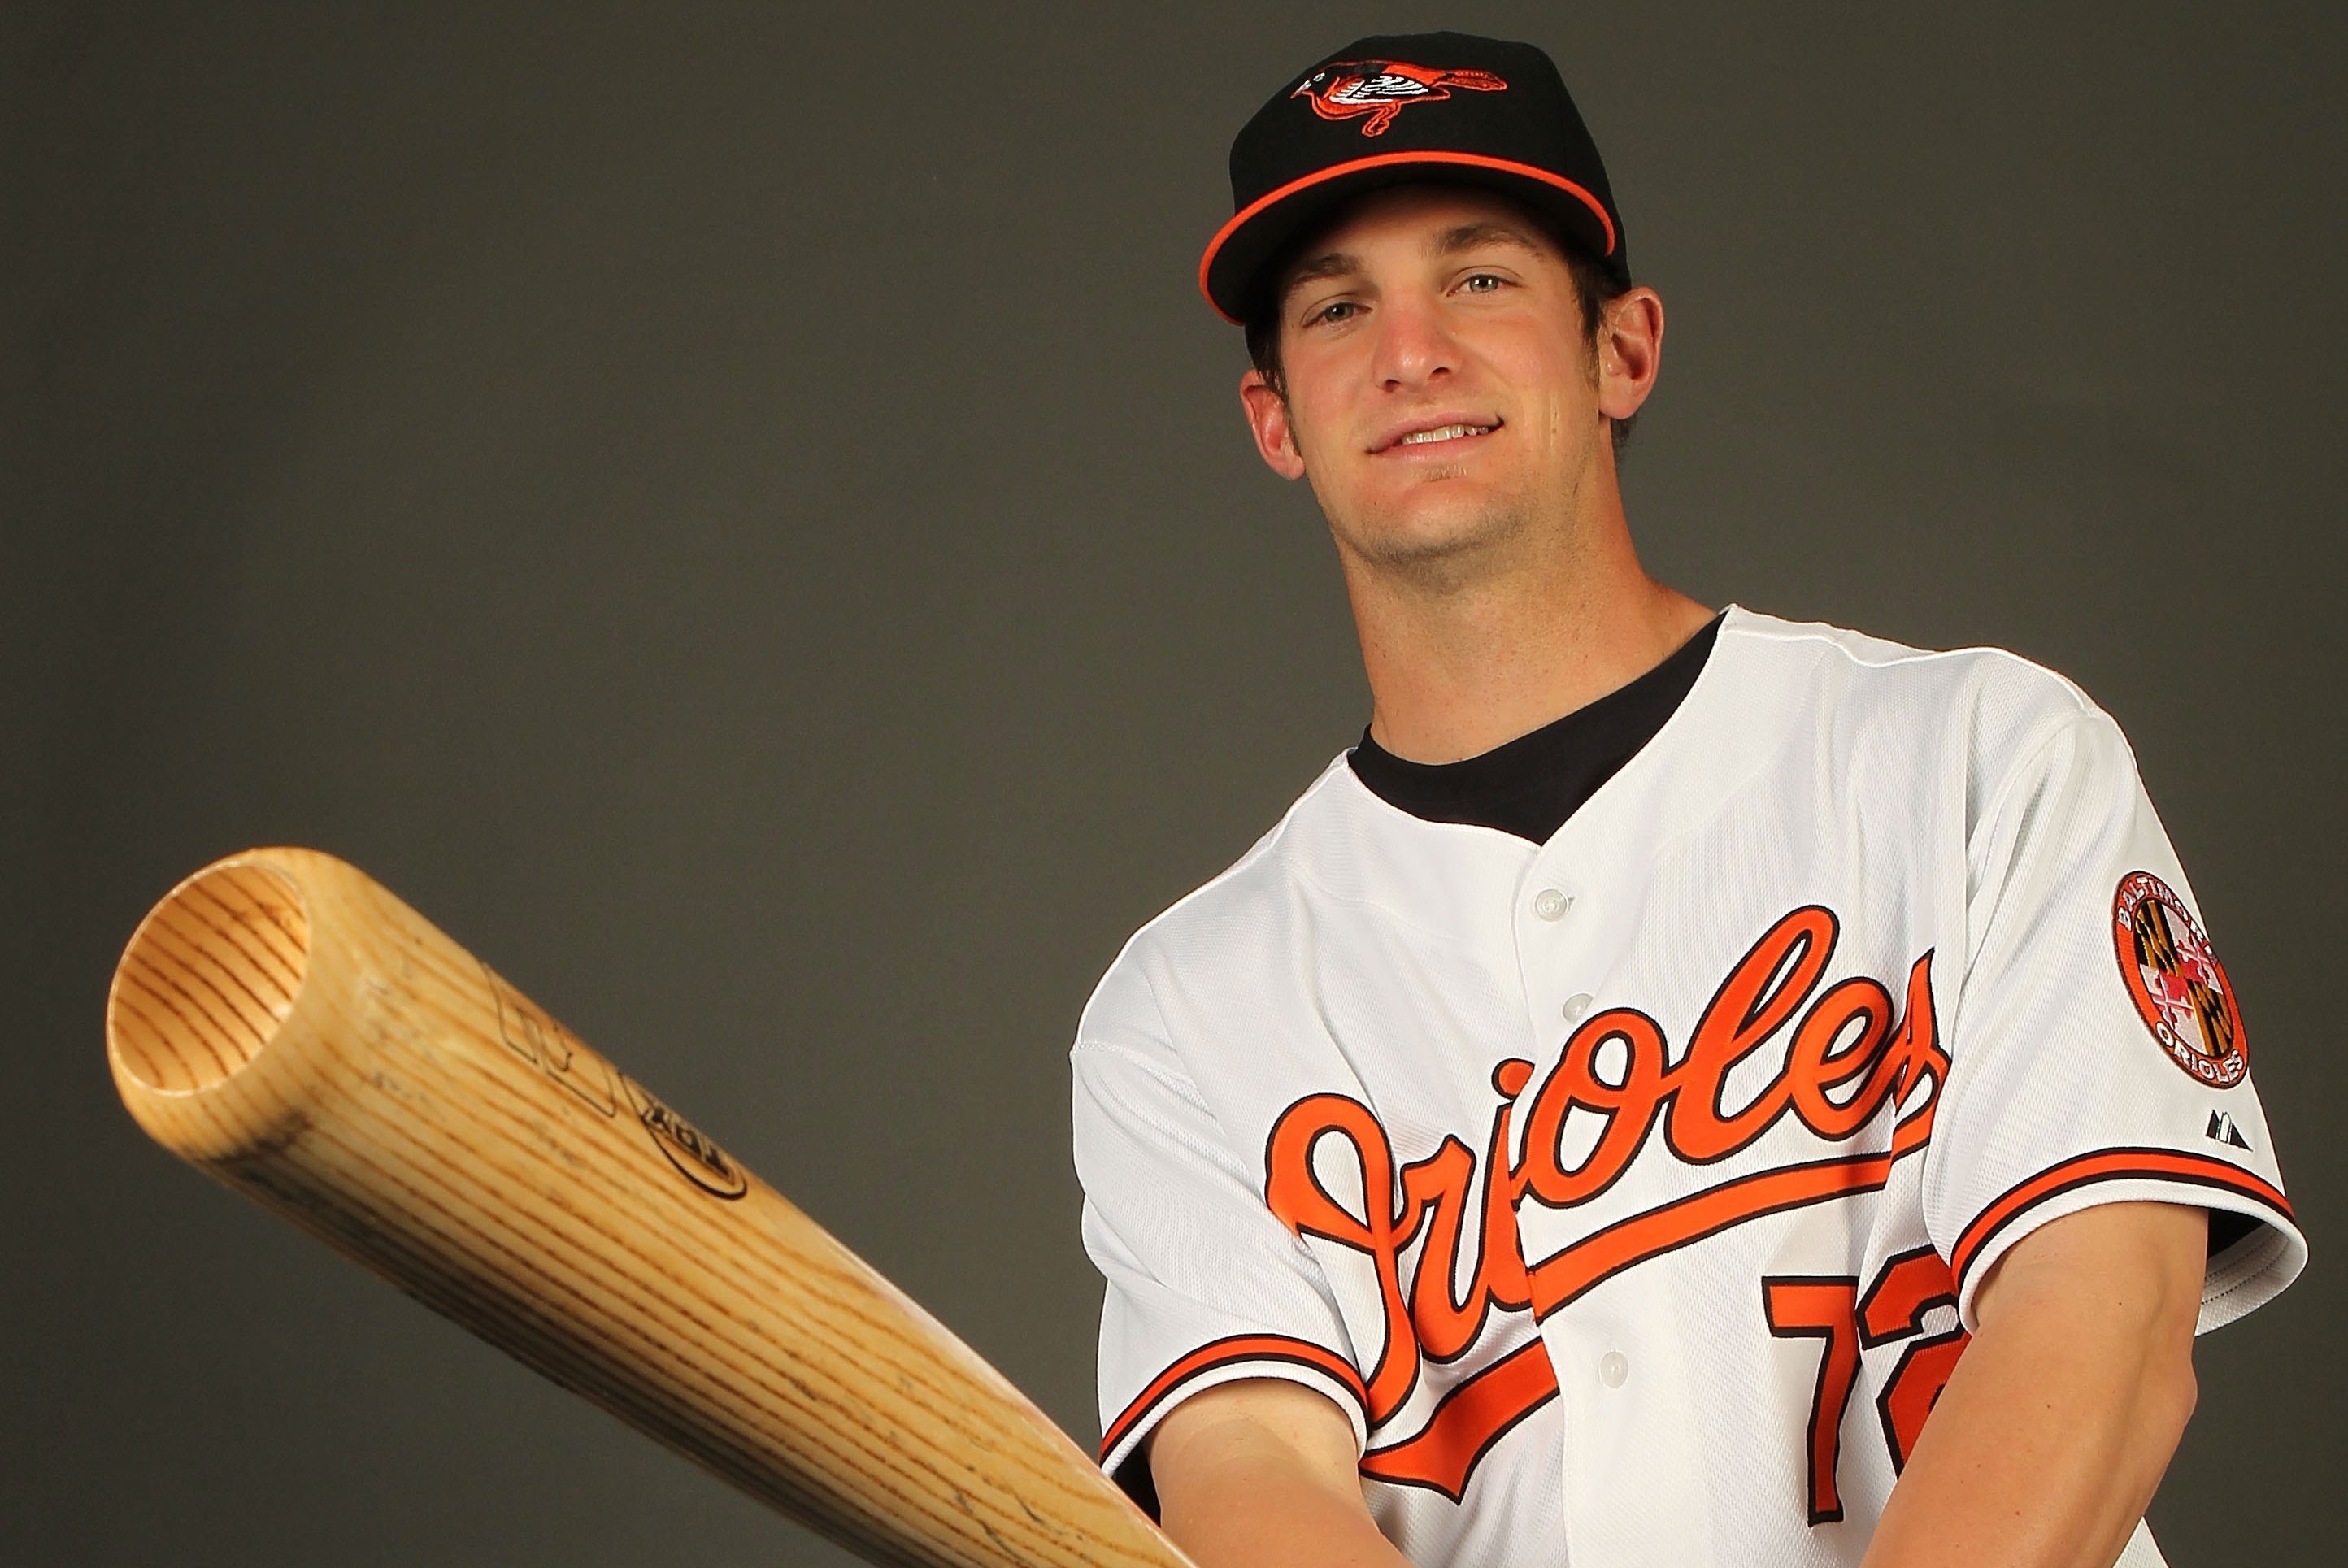 In Orioles' system, former Shorebird L.J. Hoes is comfortable again